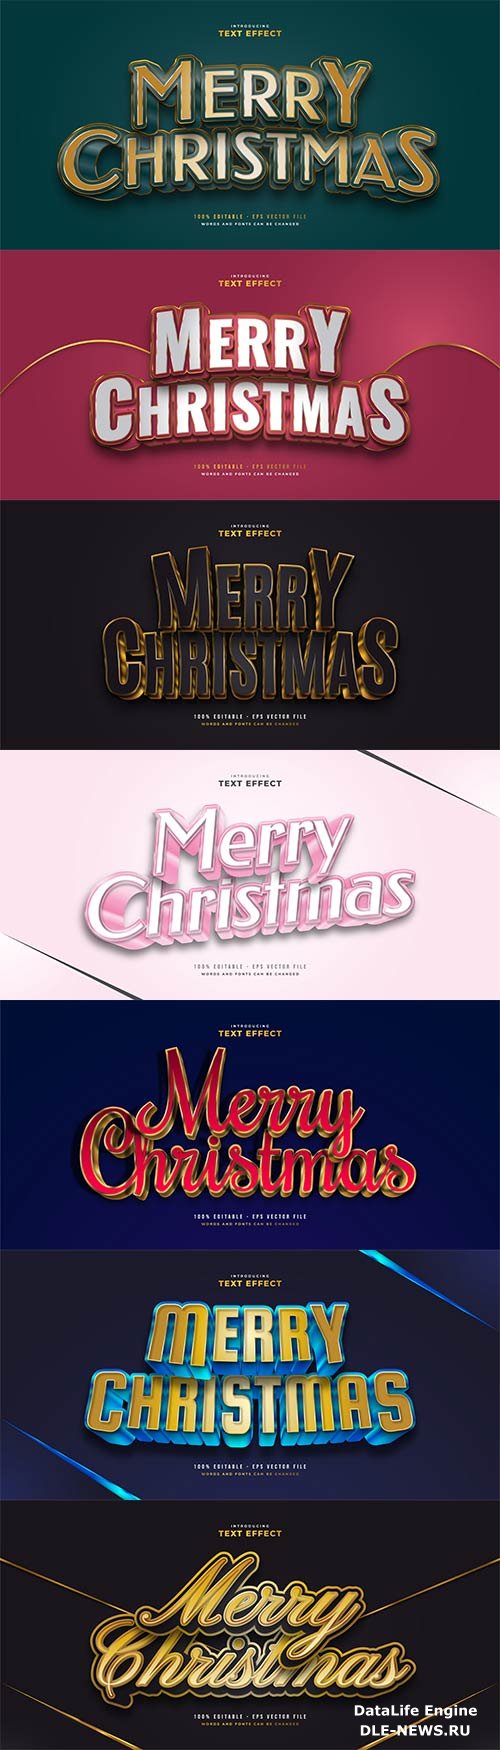 Merry christmas and happy new year 2022 editable vector text effects vol 27